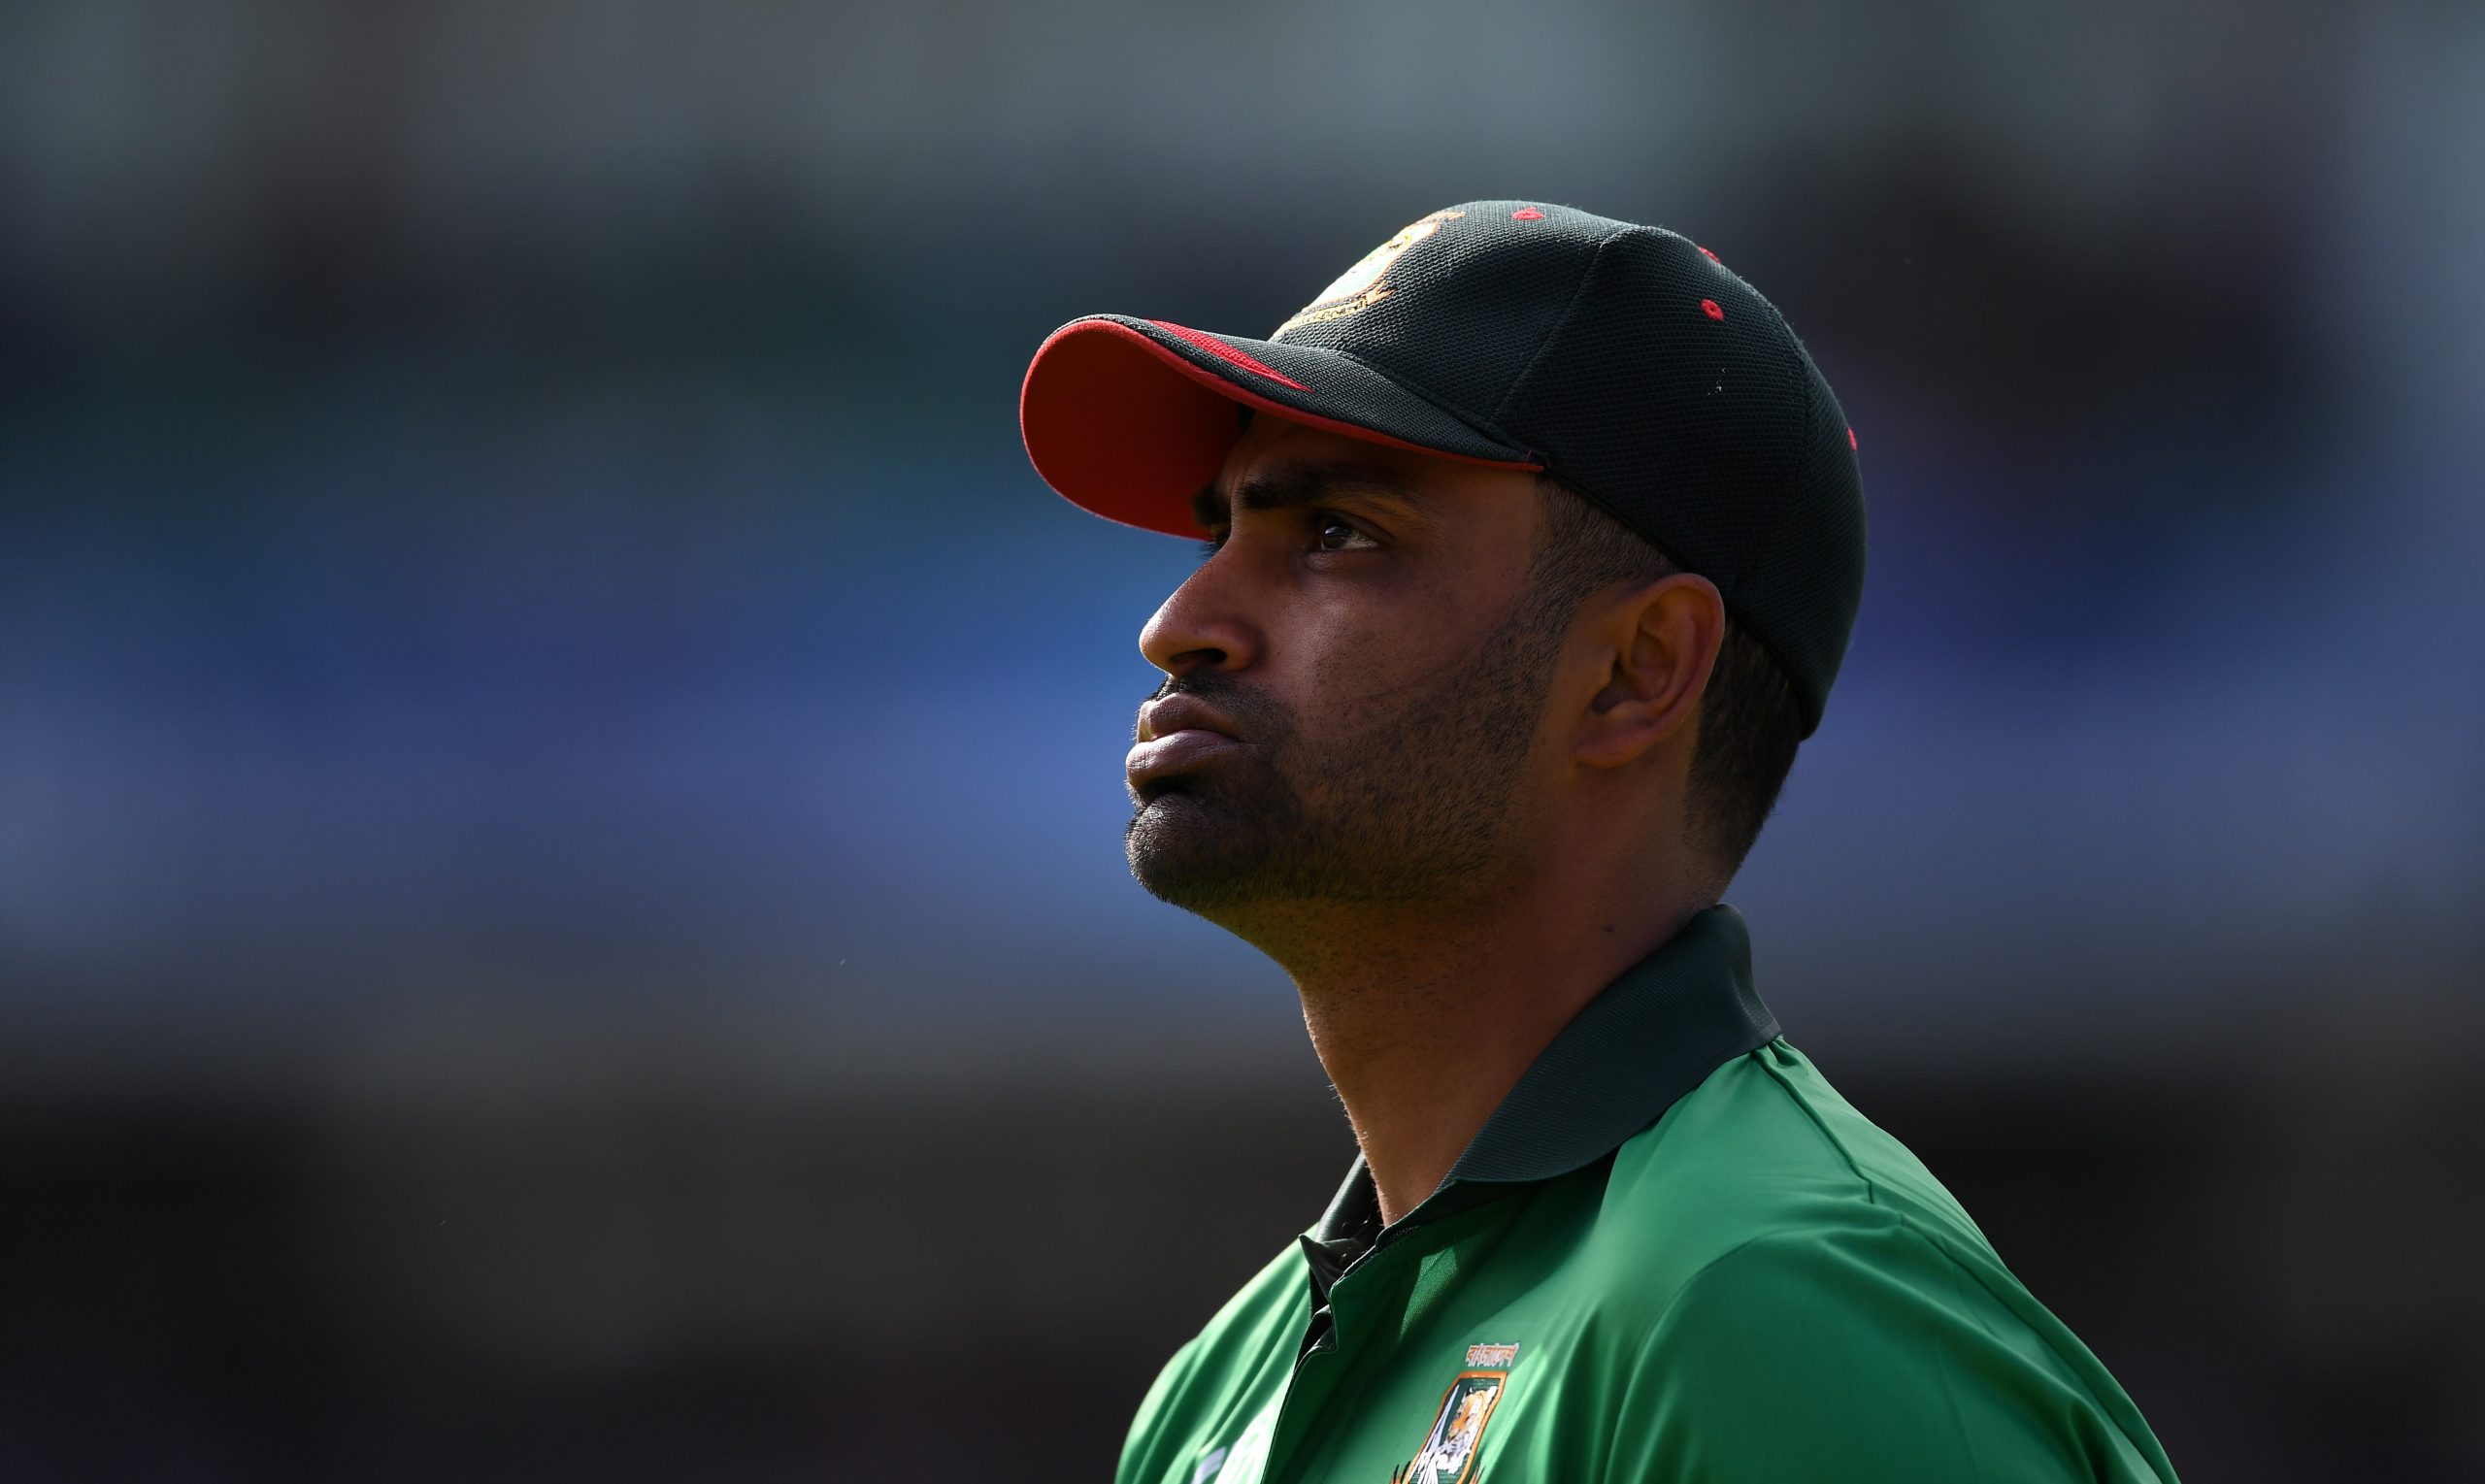 Rajasthan Royals Take A Sly Dig After Tamim Iqbal Withdraws His International Retirement